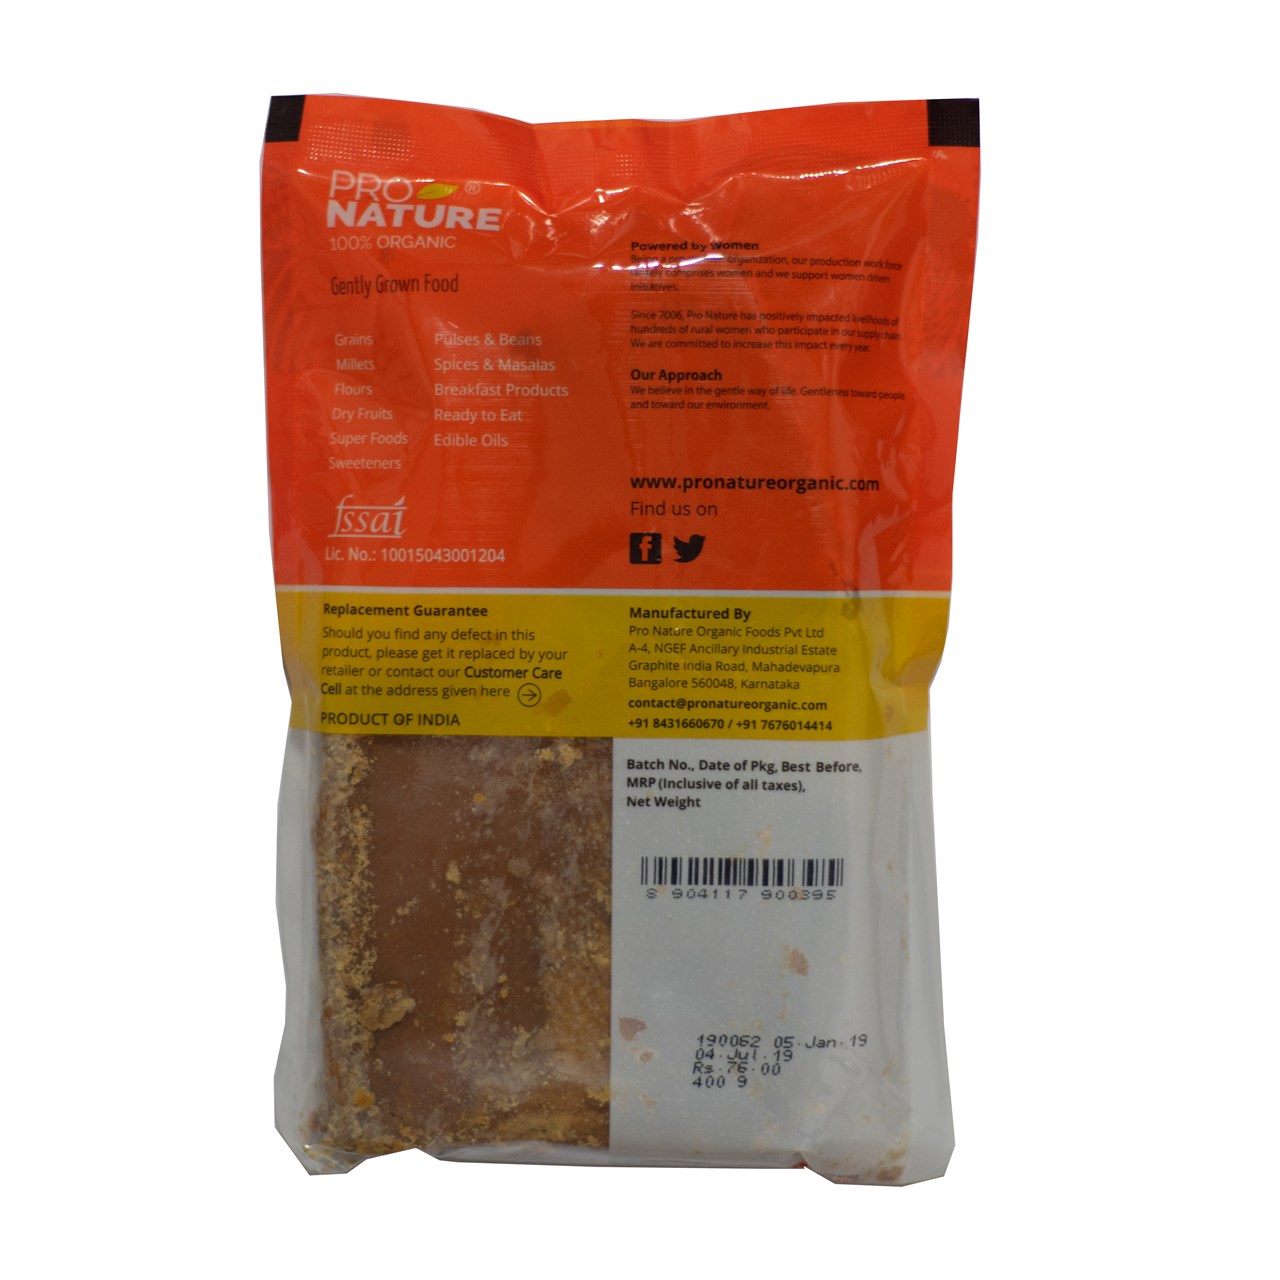 Picture of  Pro Nature 100% Organic Jaggery 400g (Pouch)